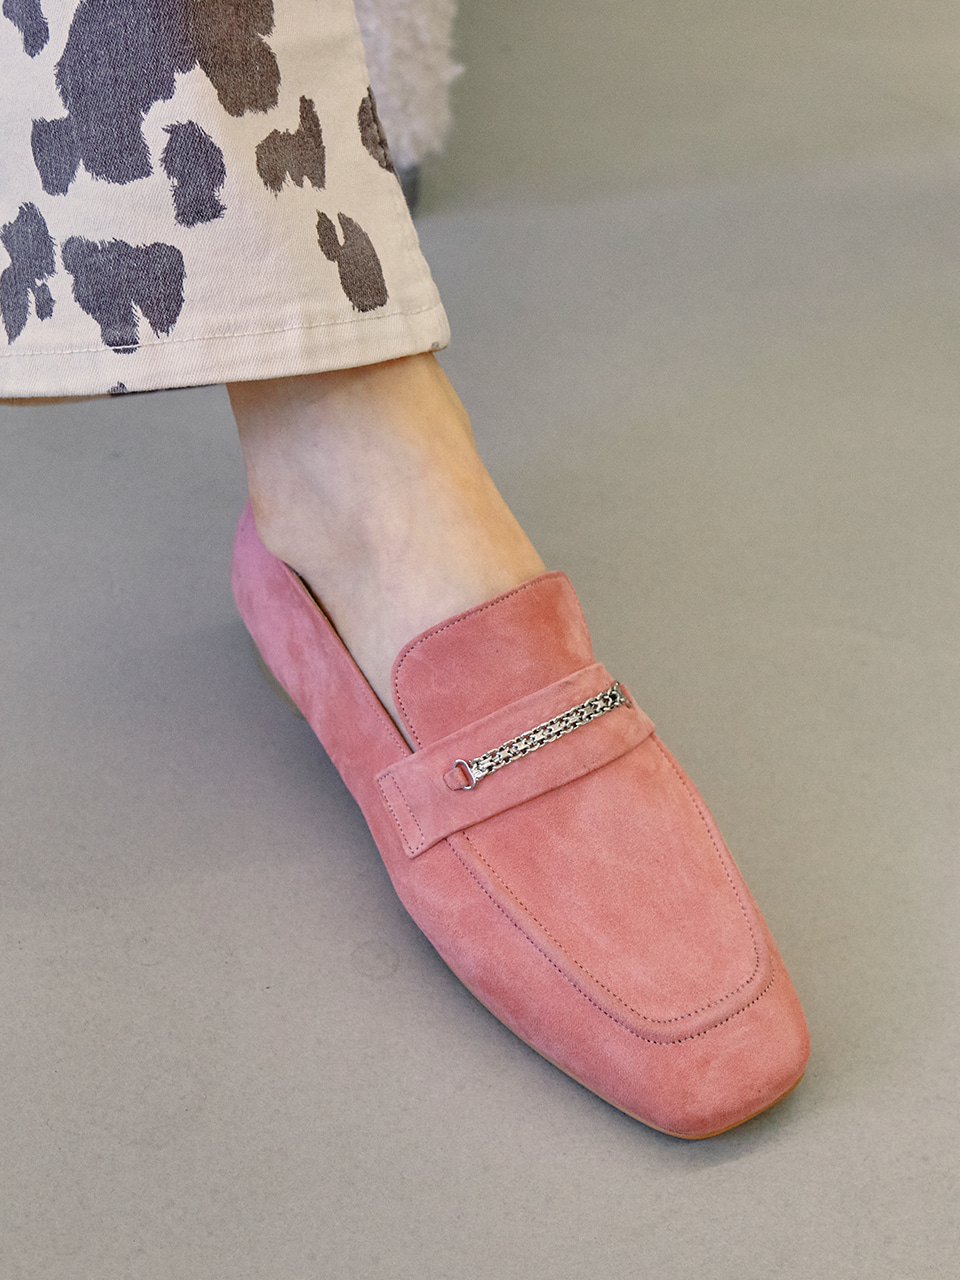 Mrc098 Chain Loafer (Pink Suede)